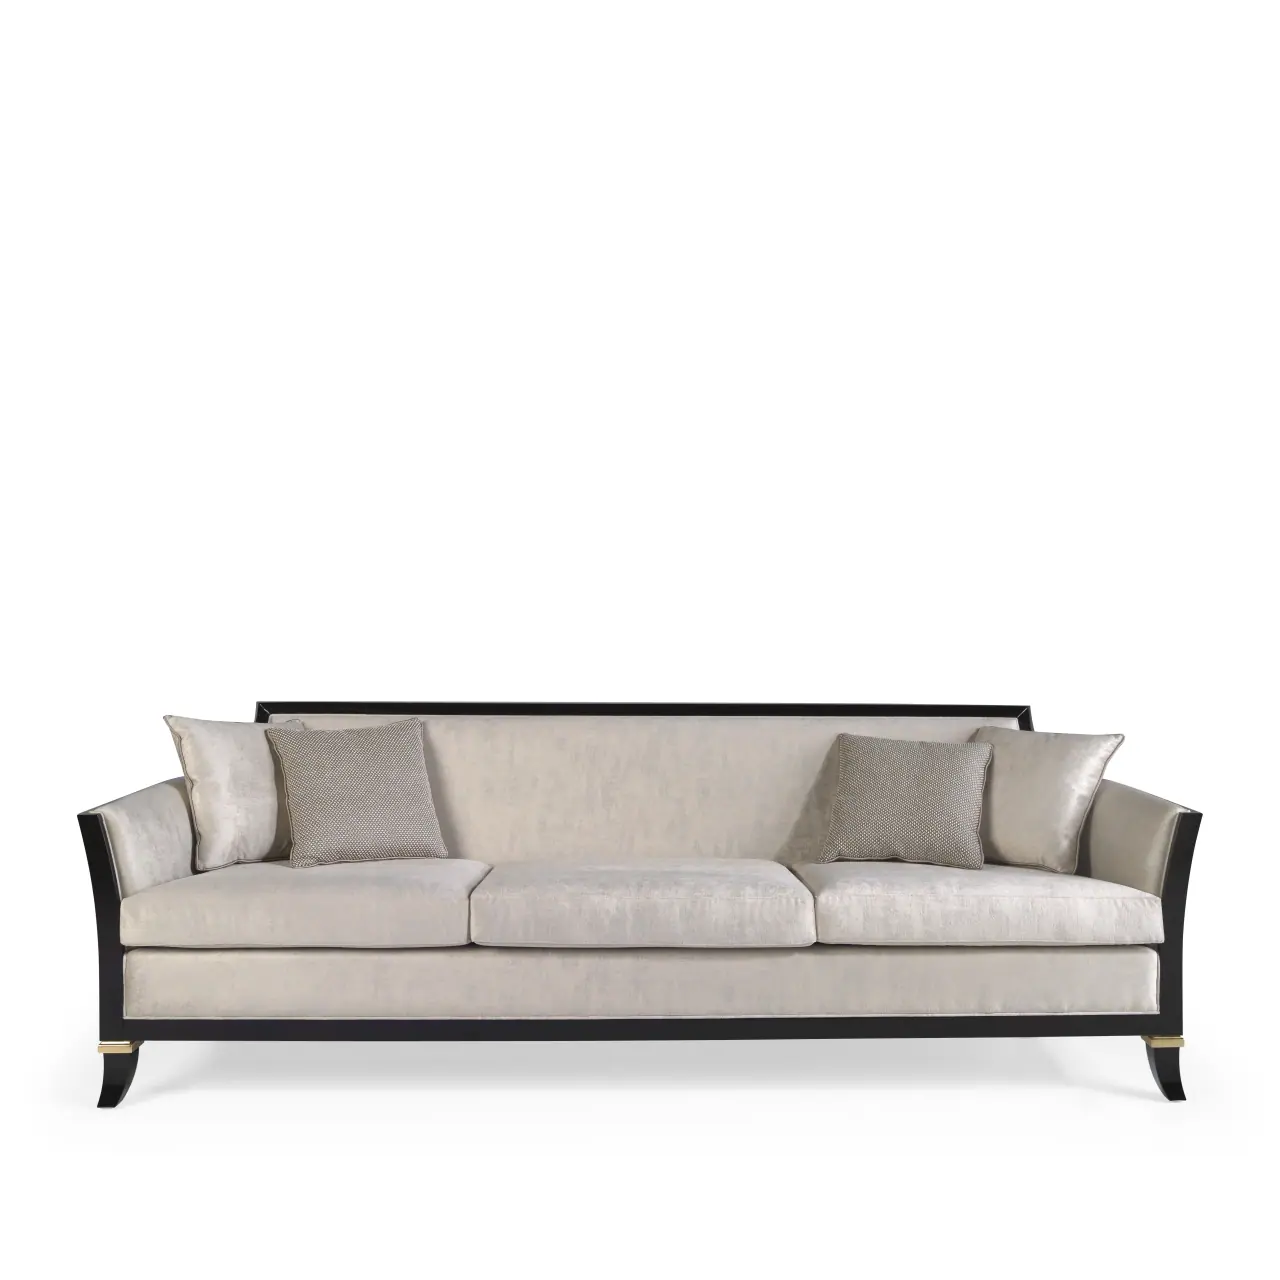 soher-marquis-collection-sofa05